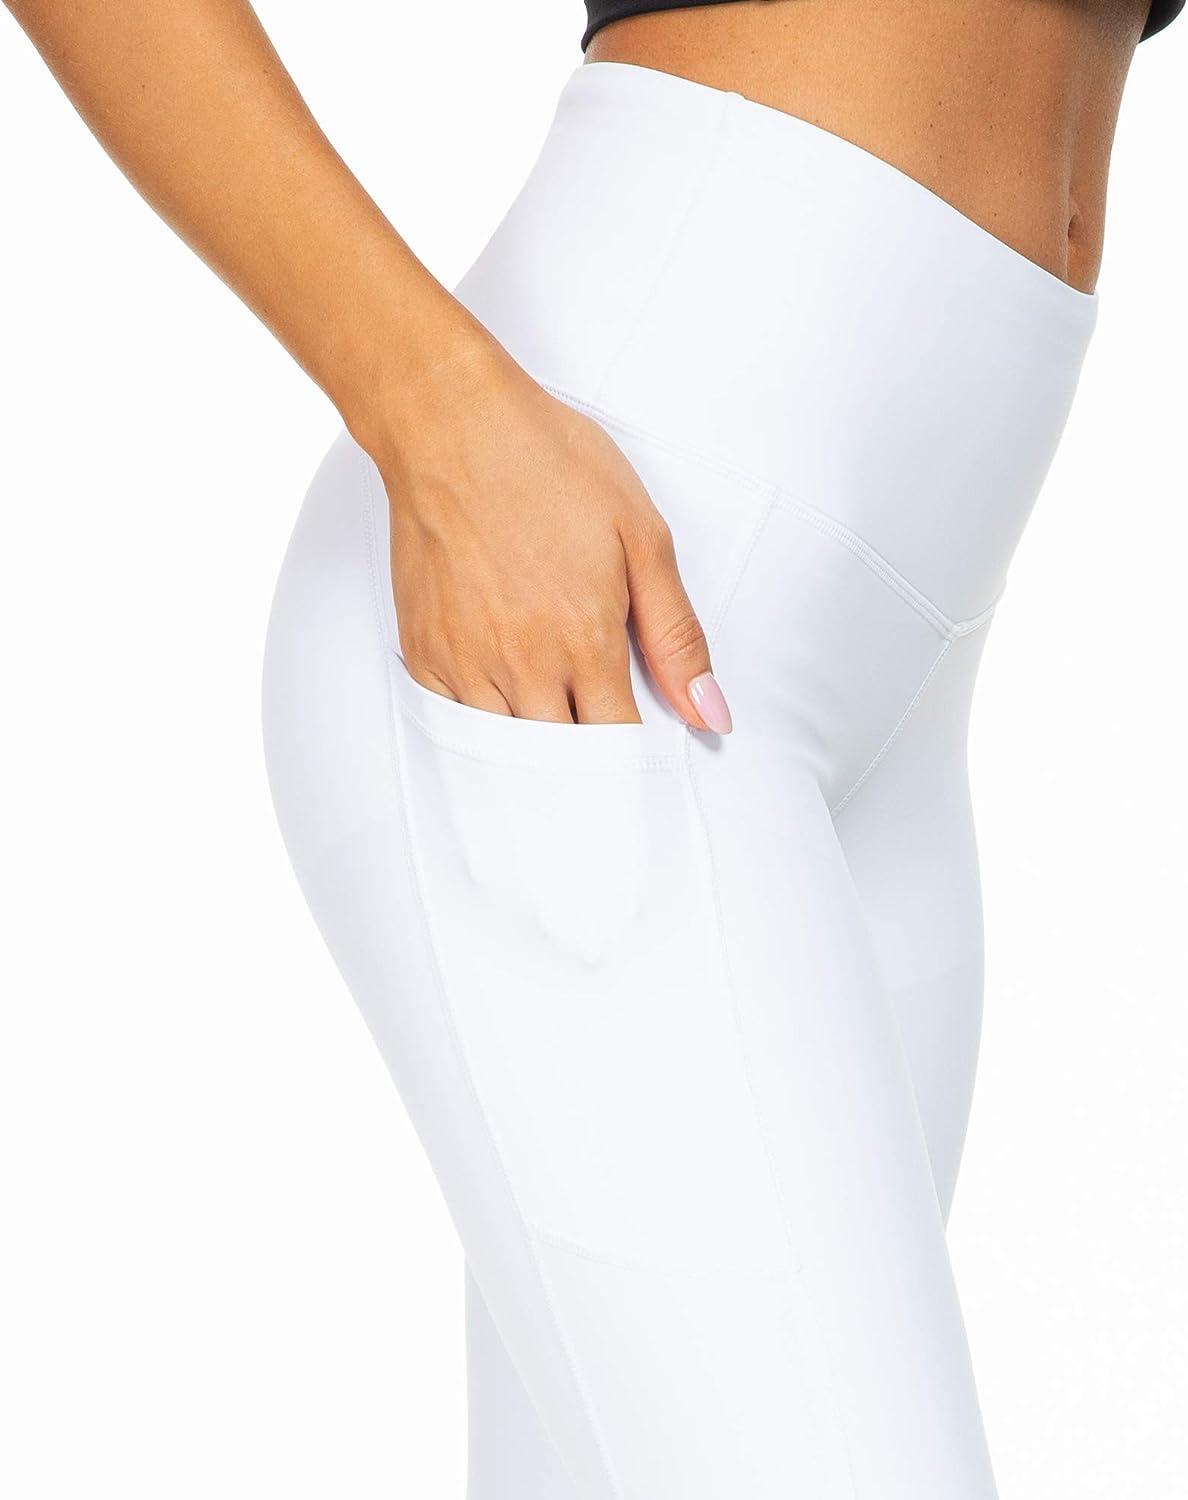 Kcutteyg Yoga Pants for Women with Pockets High Waisted Leggings Workout  Sports Running Athletic Pants Medium Full Length White